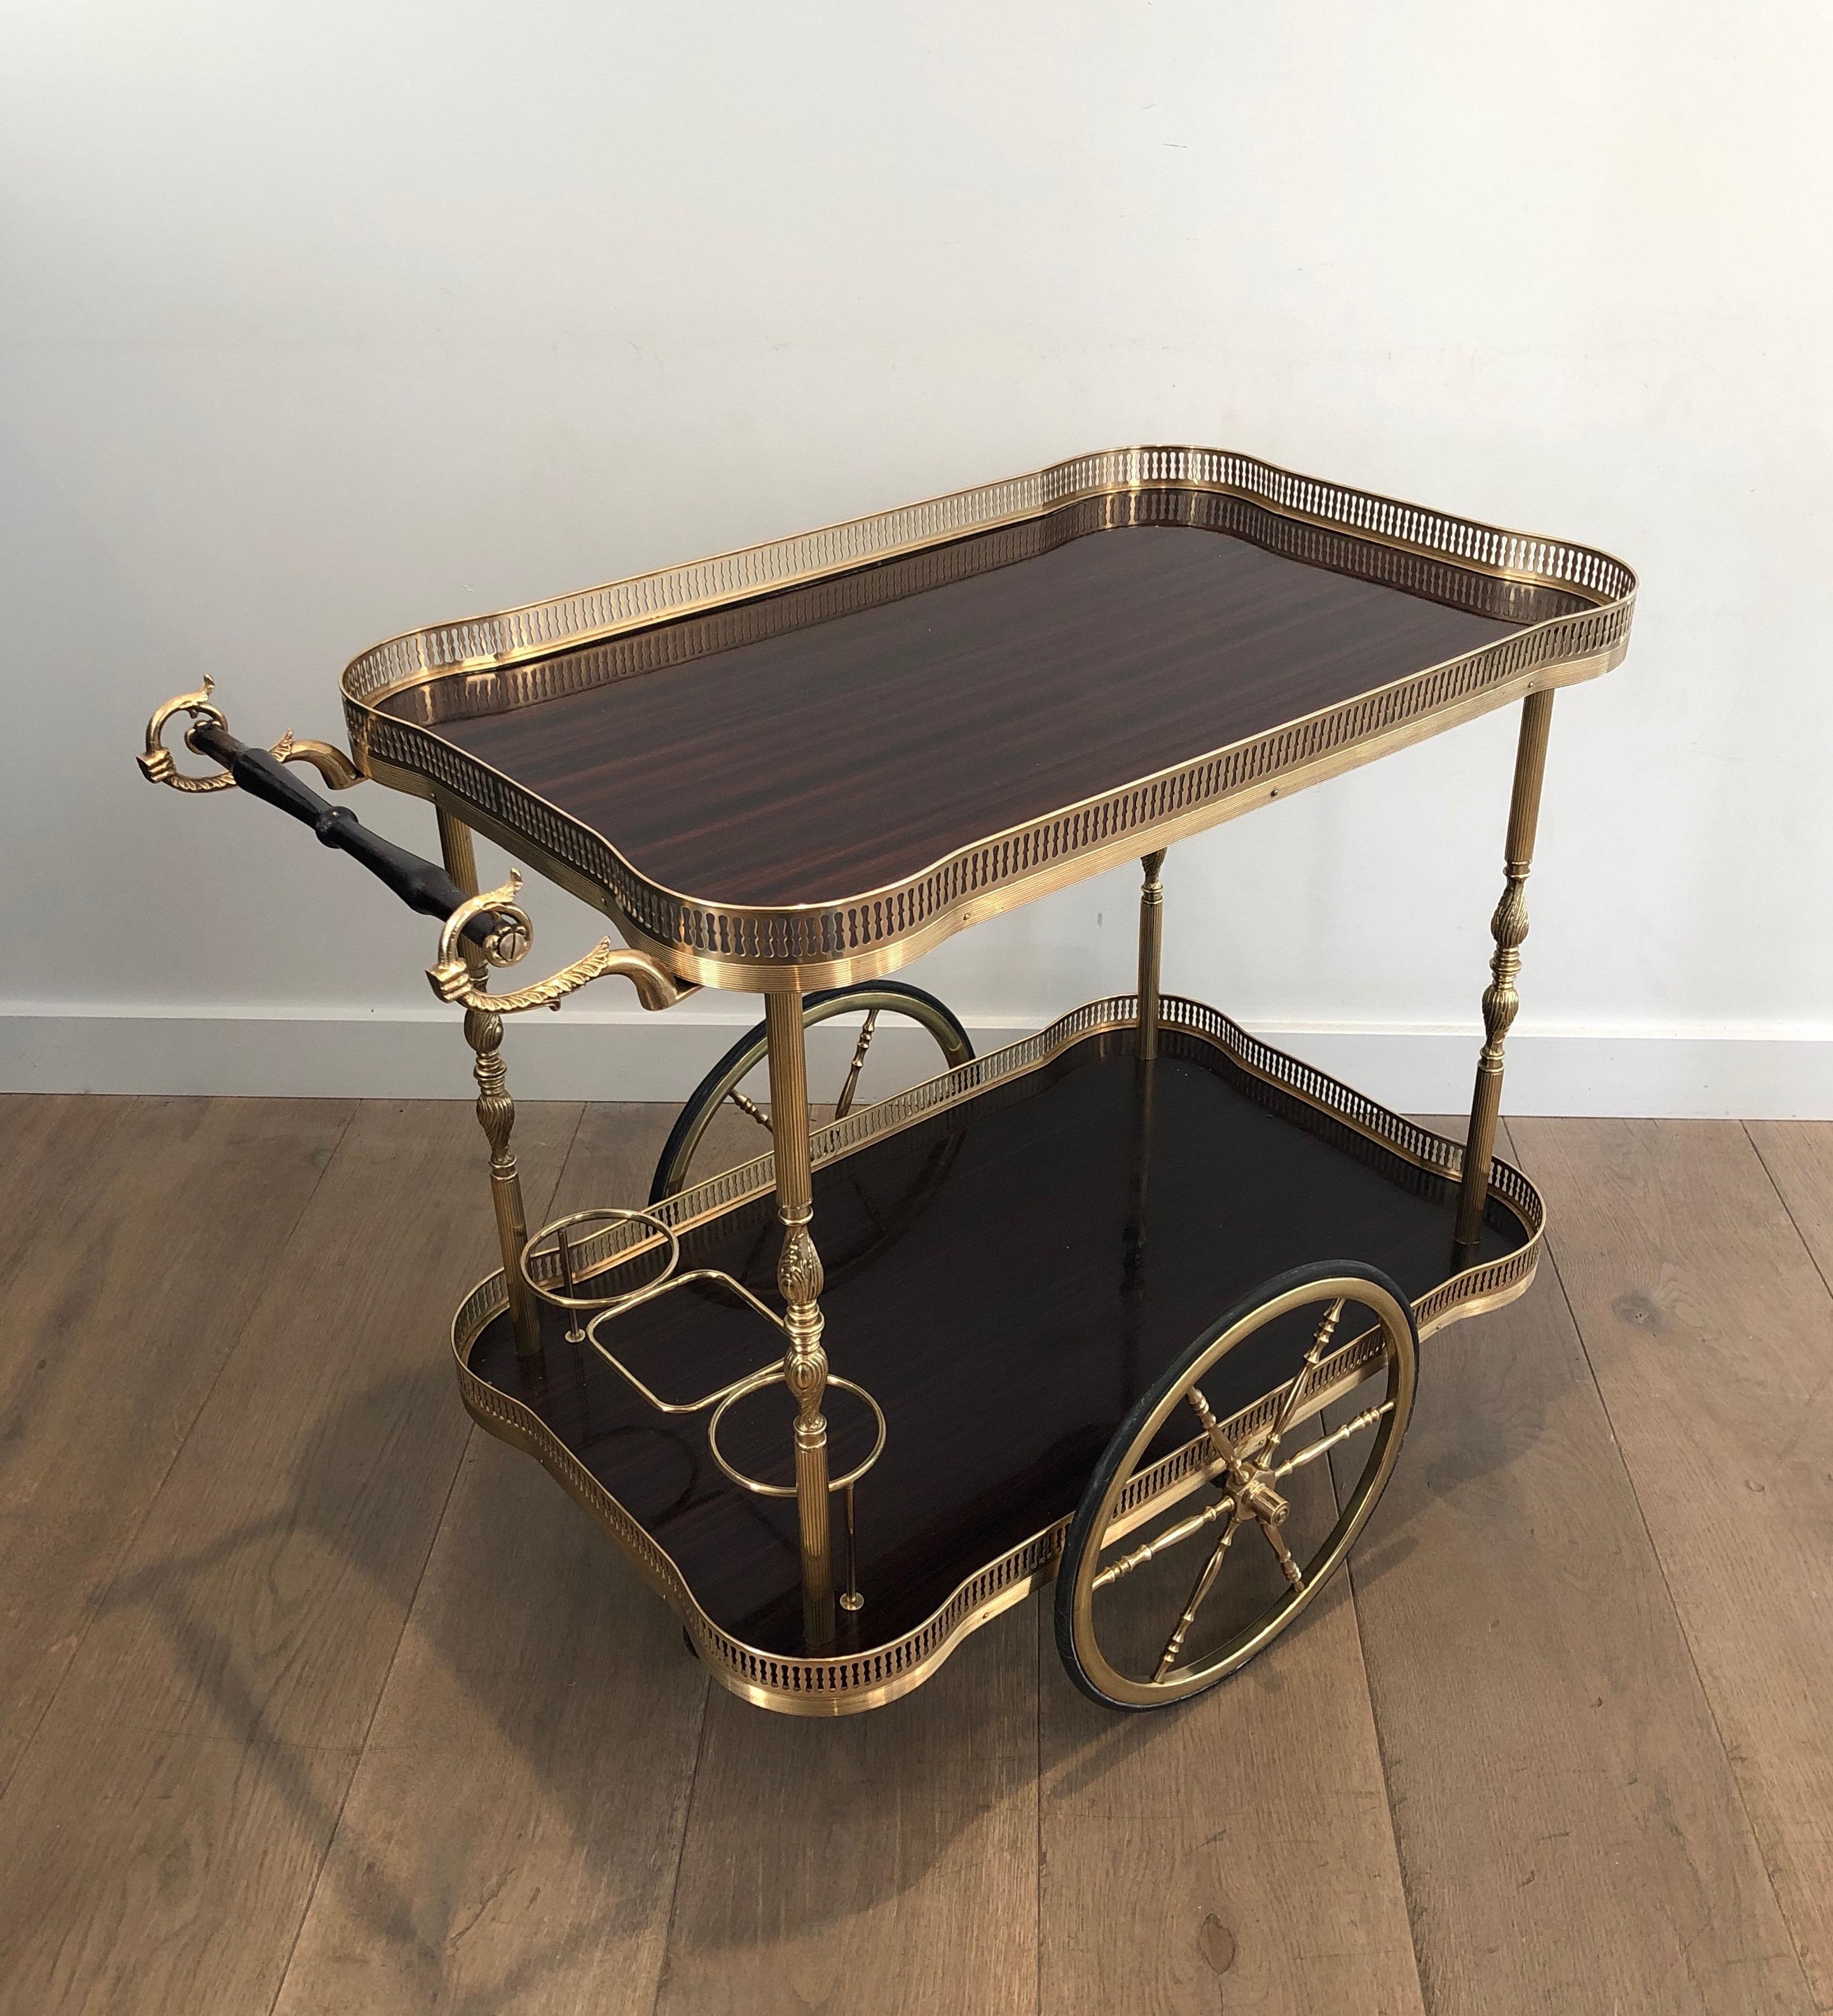 This neoclassical style bar cart is made of brass and mahogany. This is a French work, in the style of famous Maison Jansen, circa 1940.